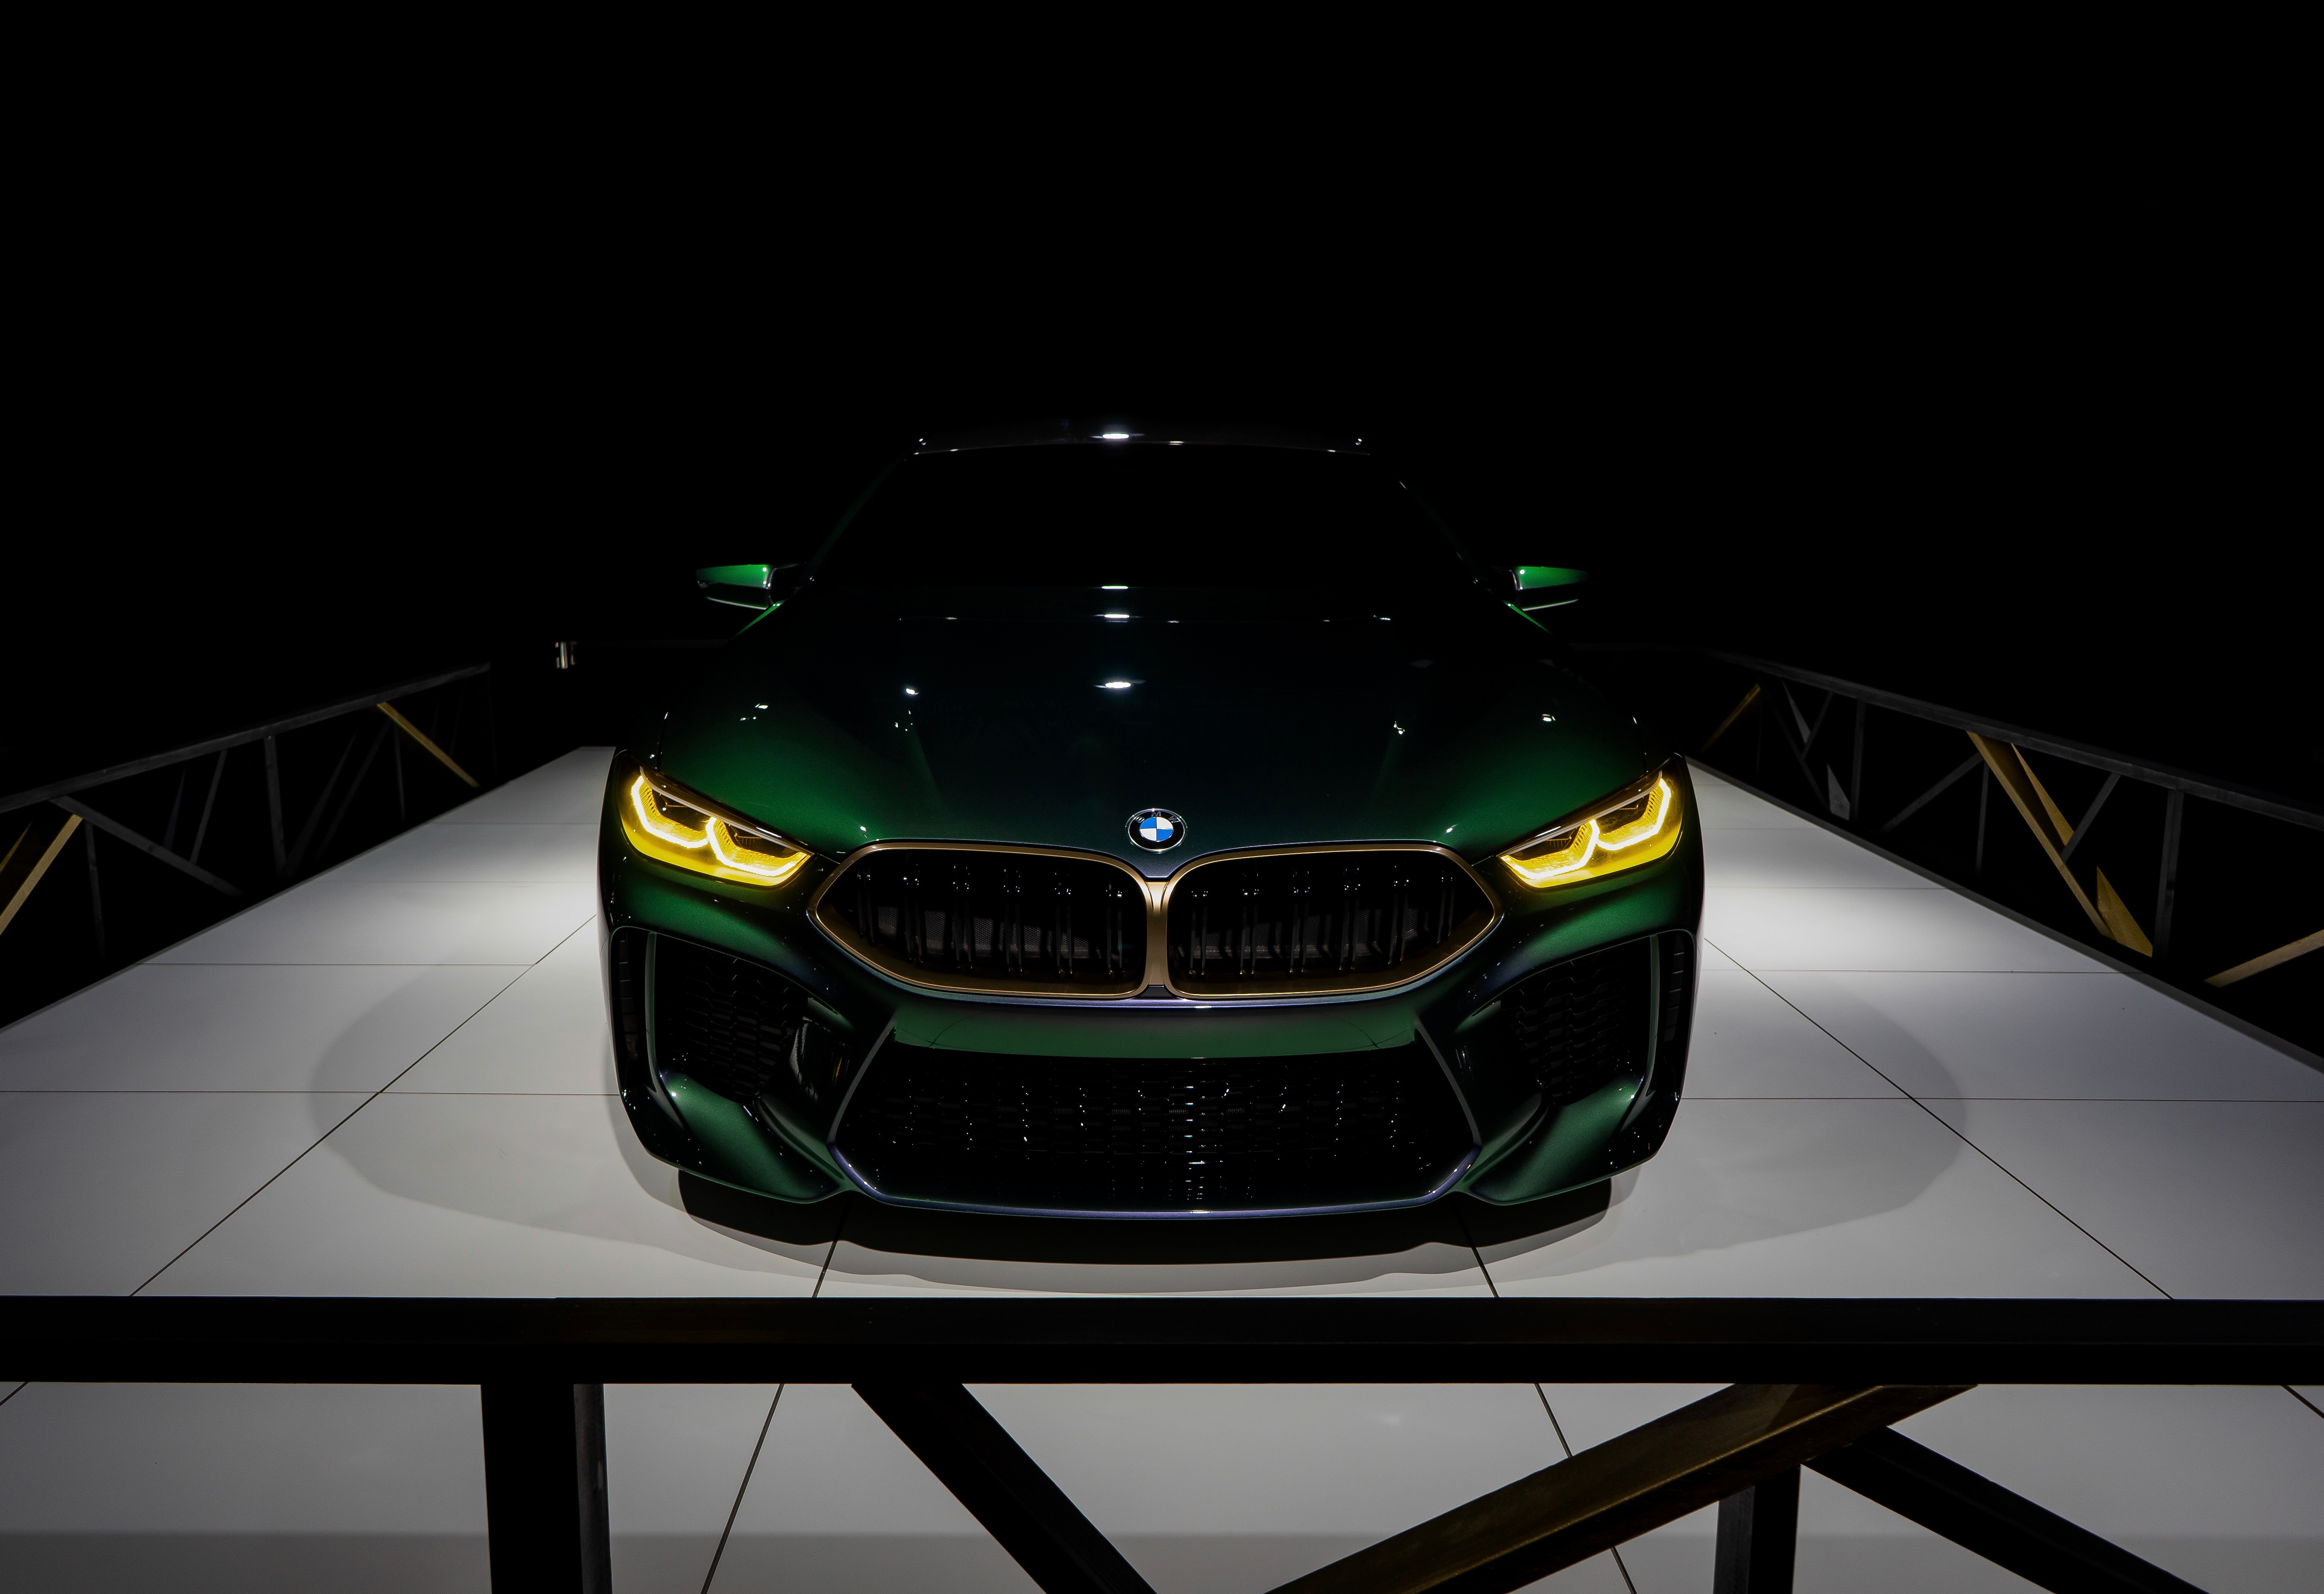 Front View cars, bmw, shadows, bumper Free Stock Photos